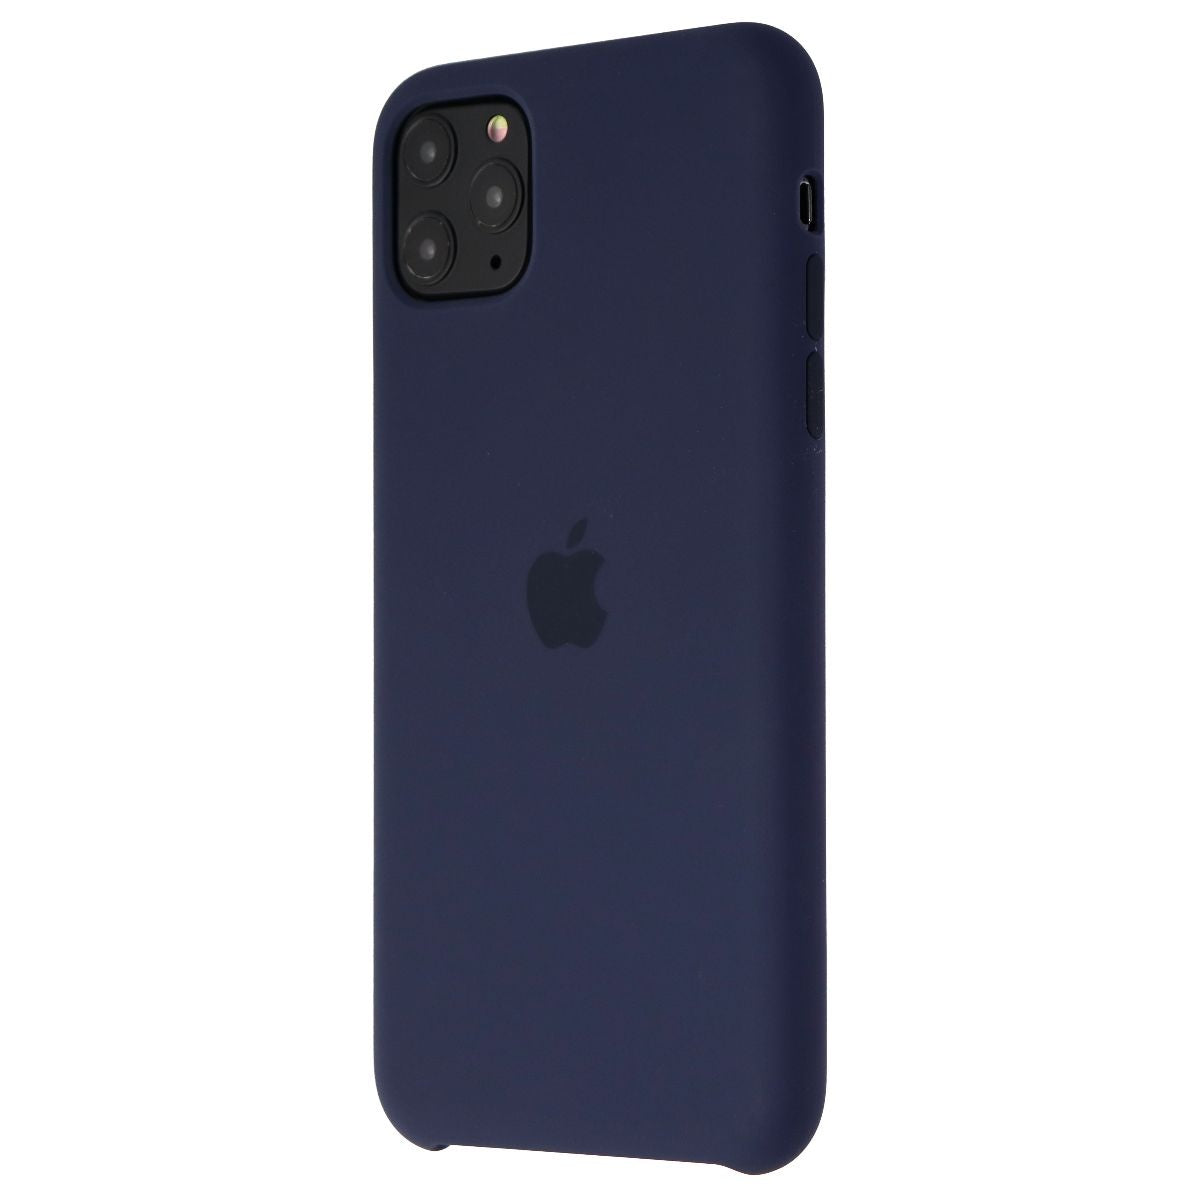 Apple Silicone Protective Case for iPhone 11 Pro Max - Midnight Blue